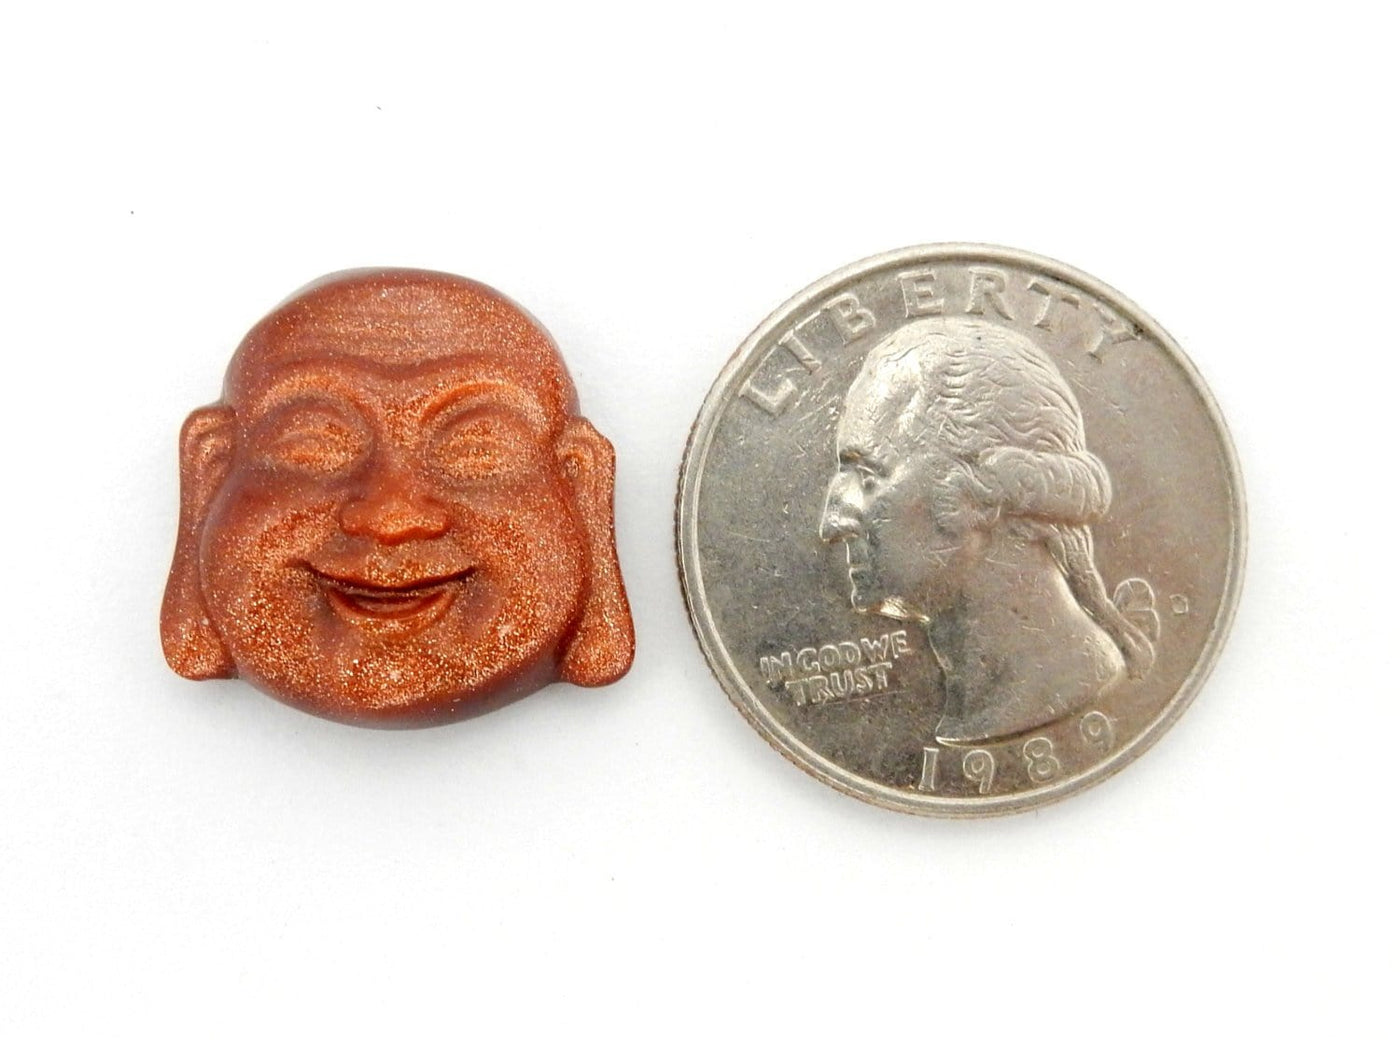 Goldstone Buddha Head Cabochon next to a quarter for size reference on white background